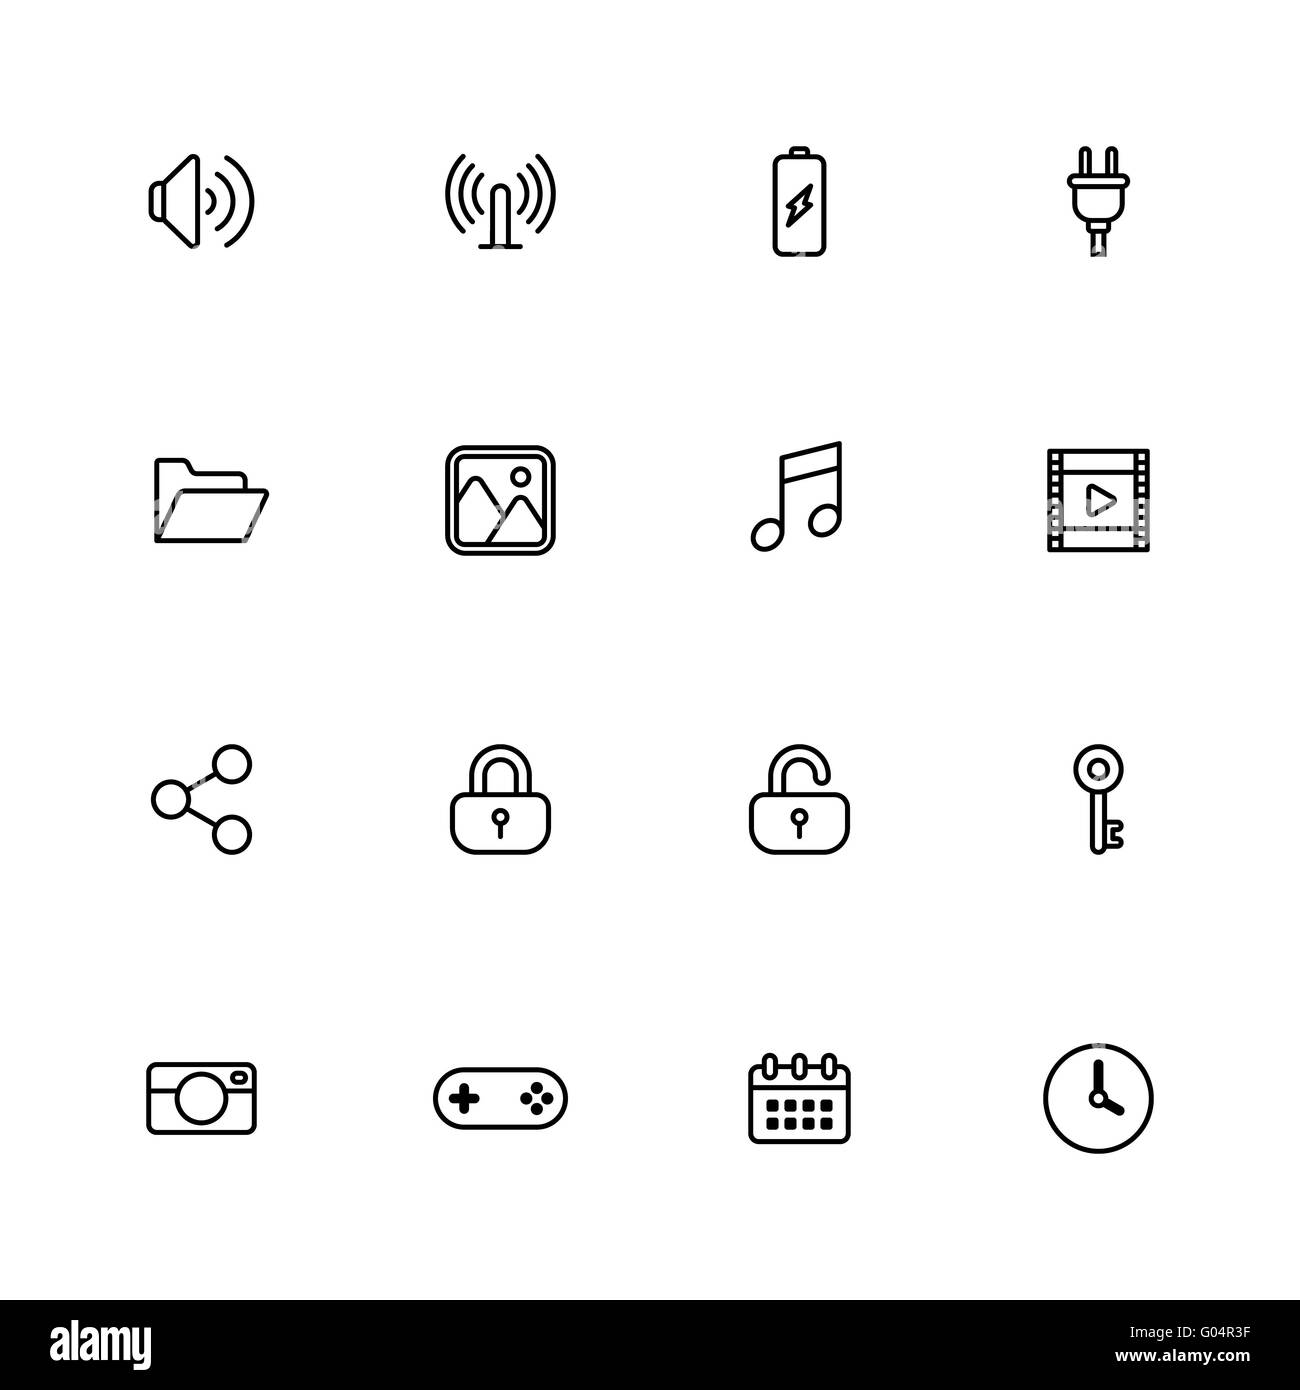 [JPEG] black line simple web icon set for web, UI, infographic and mobile apps Stock Photo